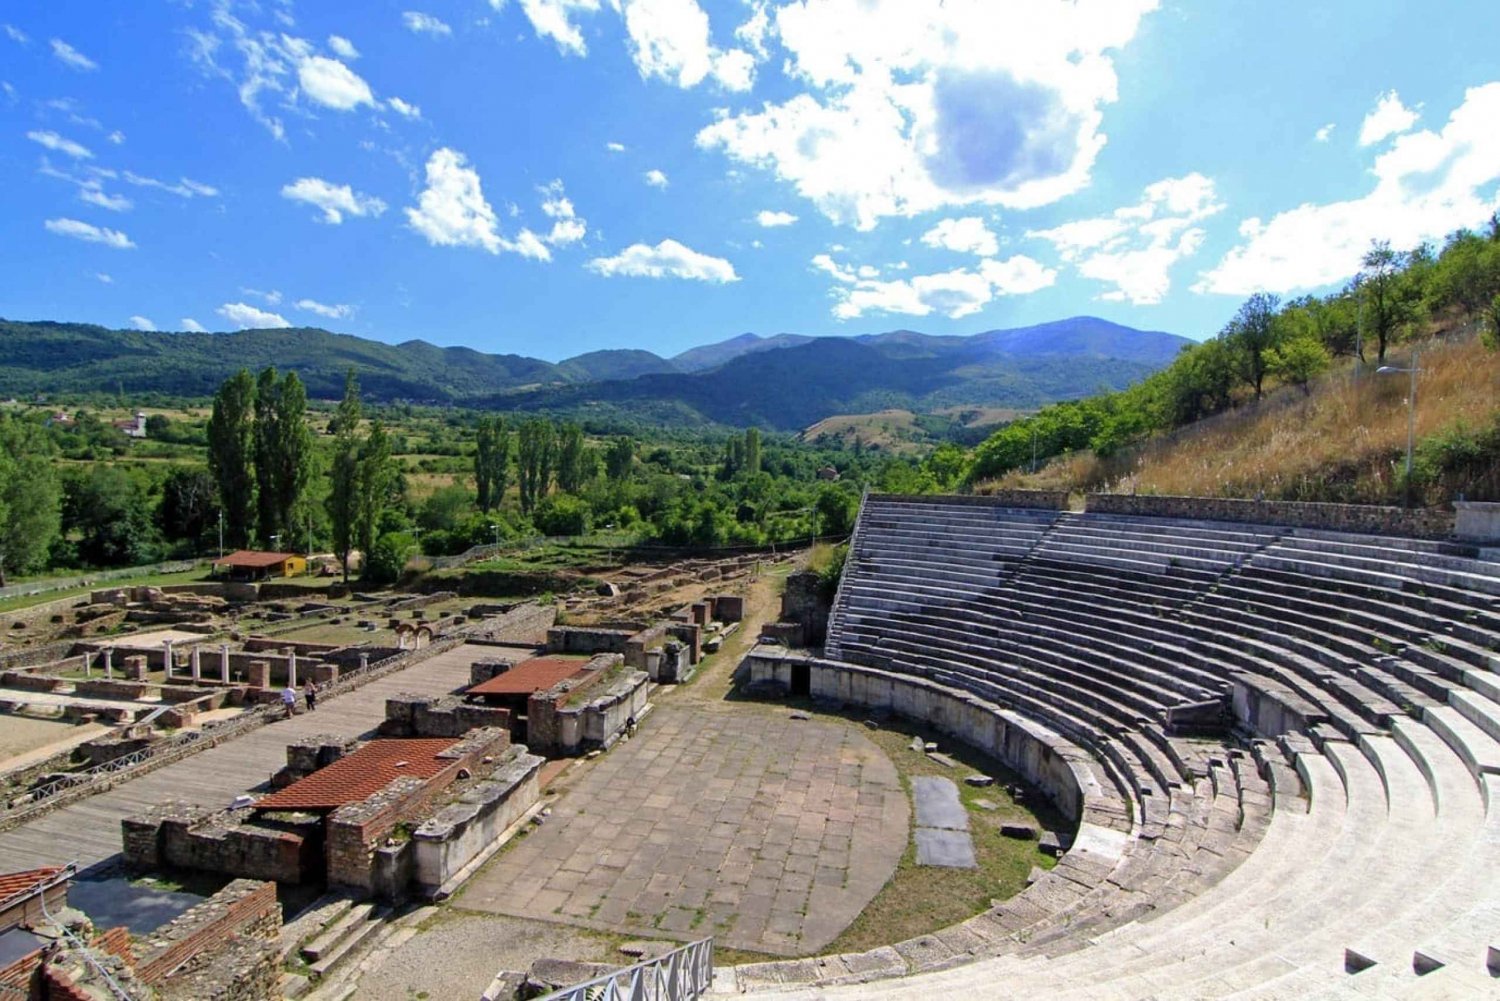 From Skopje: Bitola and Ohrid Day Tour